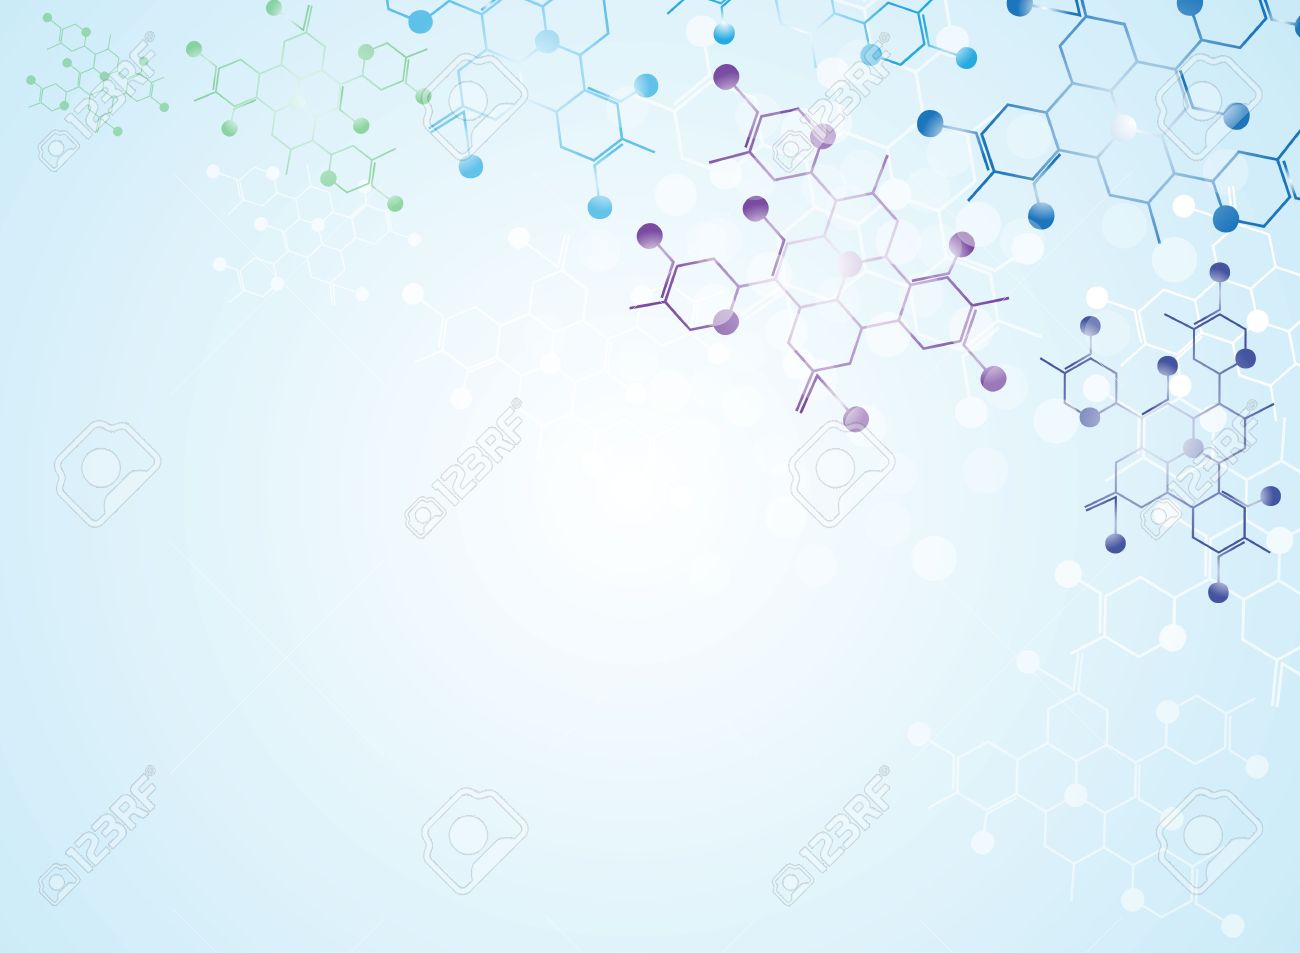 Medical Abstract Science Background Illustrations Royalty